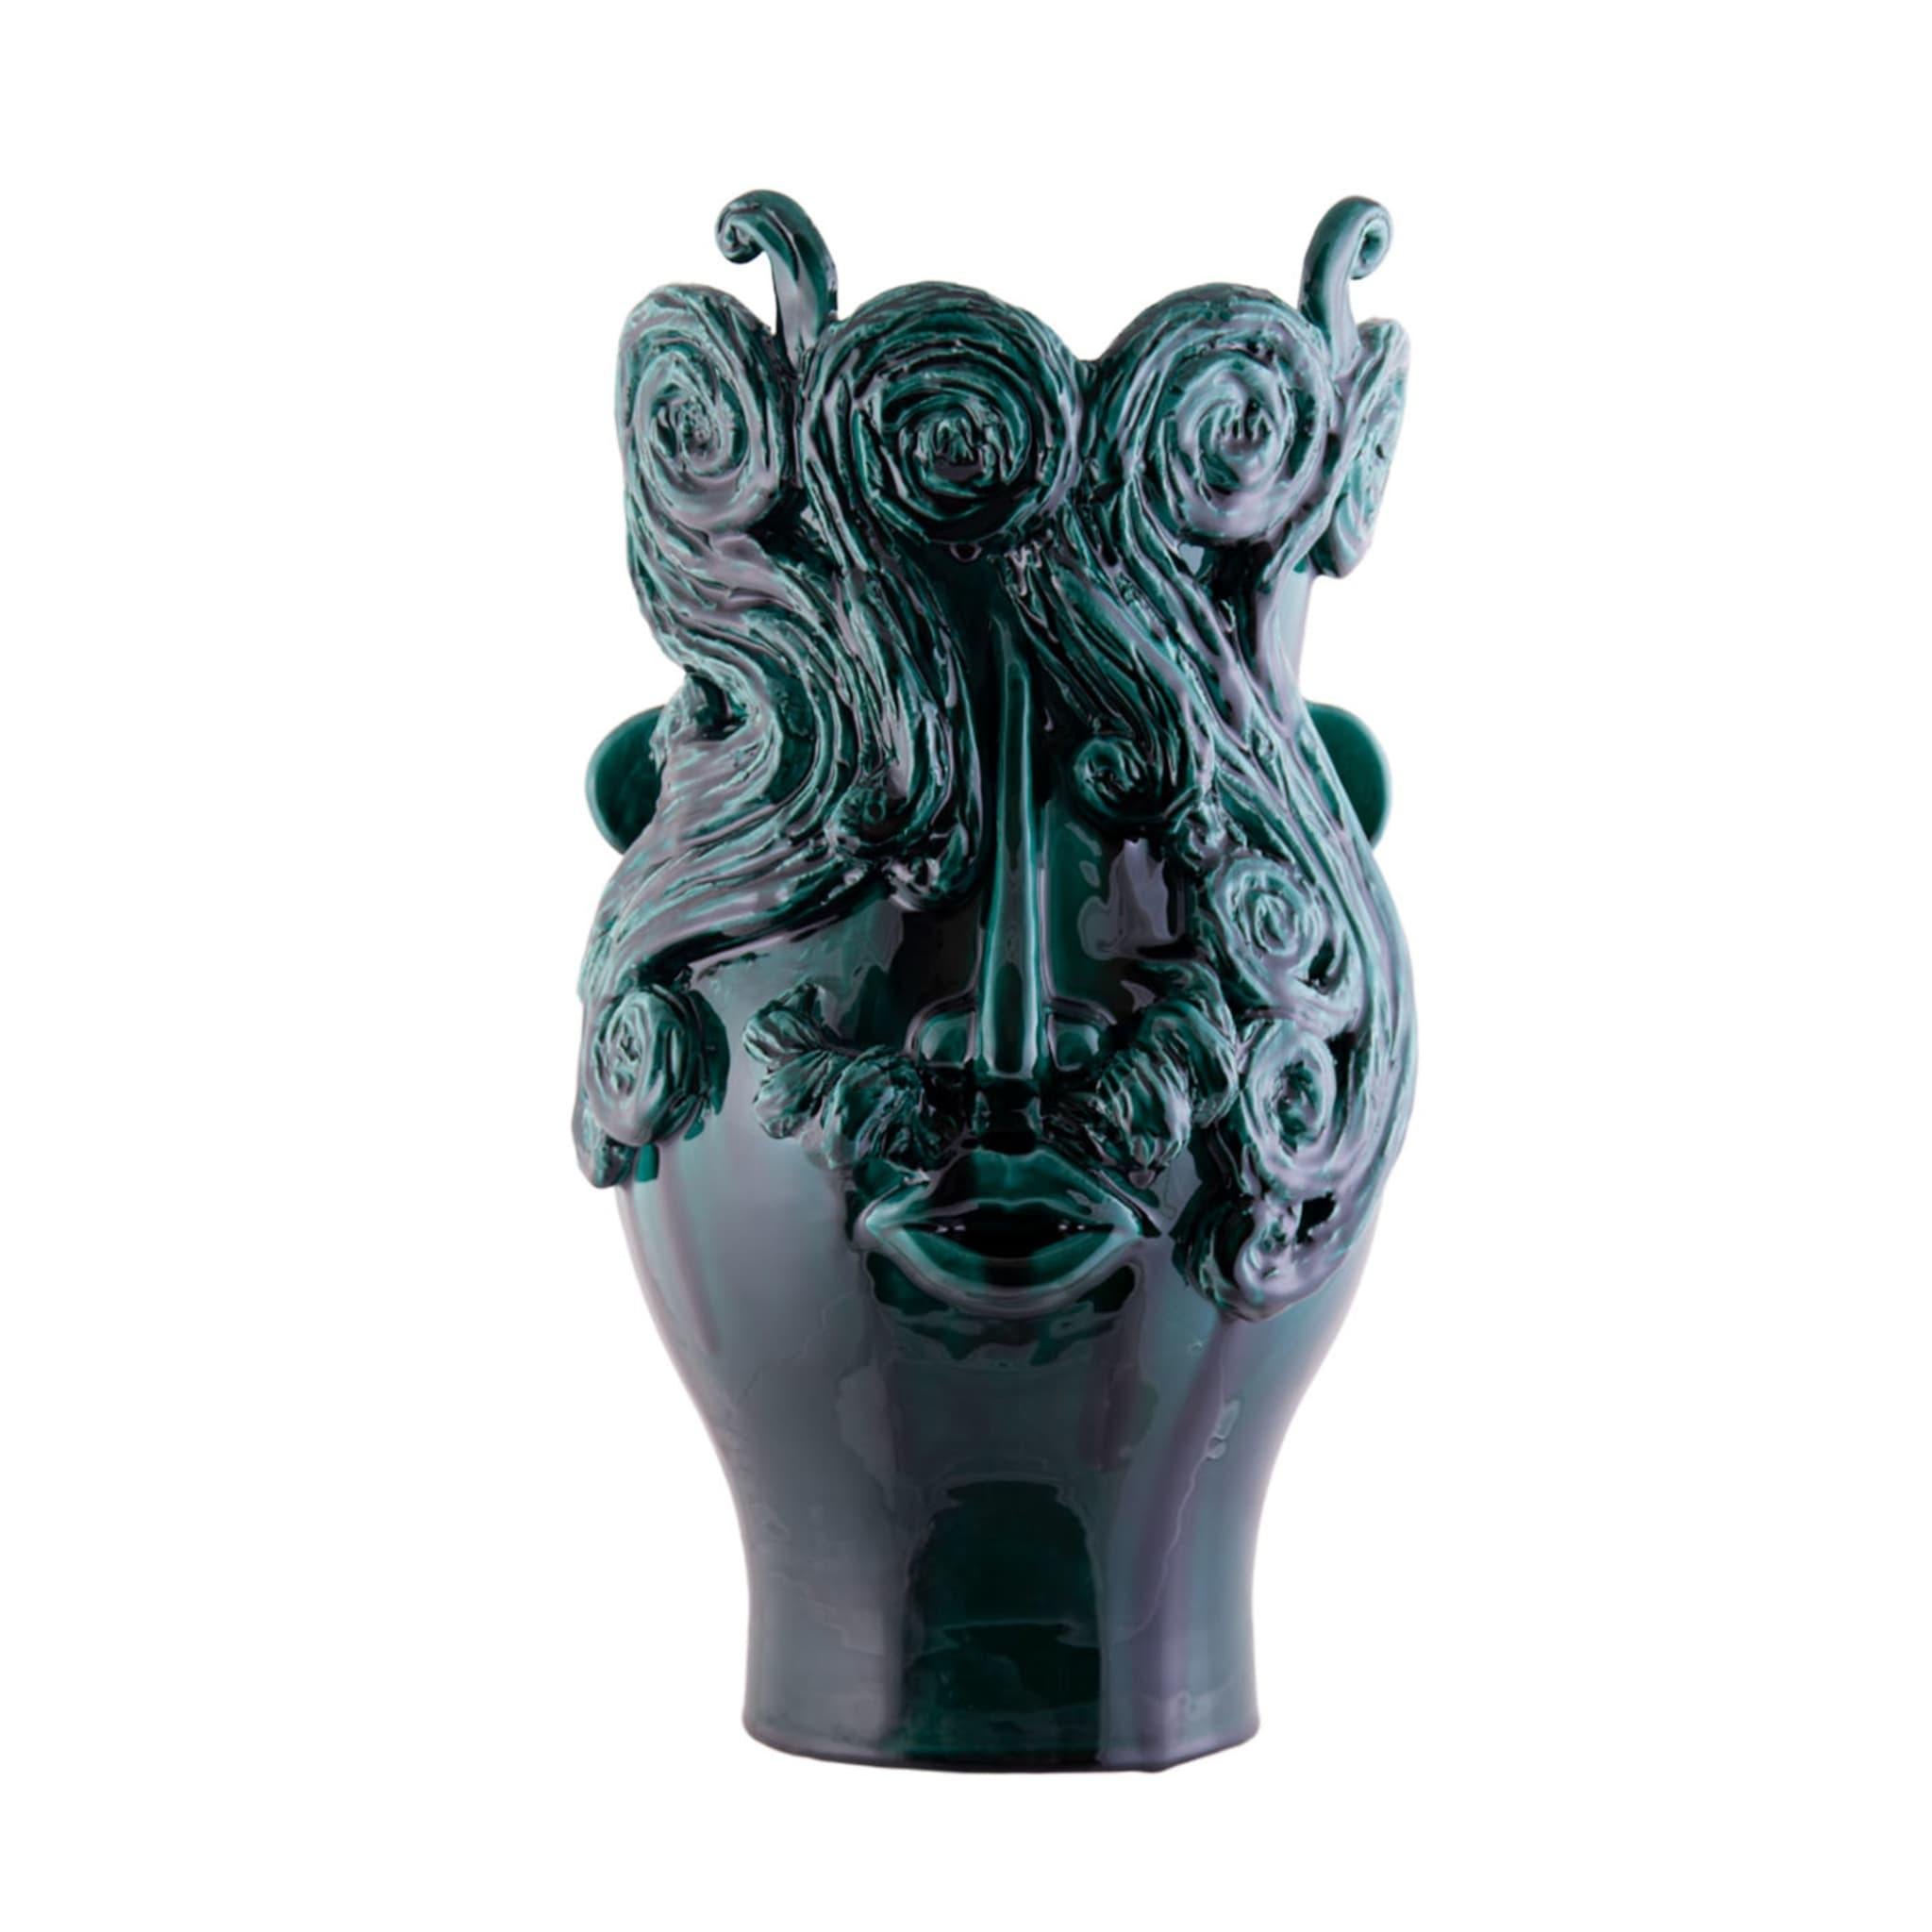 These two vases represent the Grooms in Green, they travel far, but their heart is in Sicily, among the capers of Salina and the olives of Belice. They walk in pairs, but sometimes they can be separated. Please, contact the Concierge for further